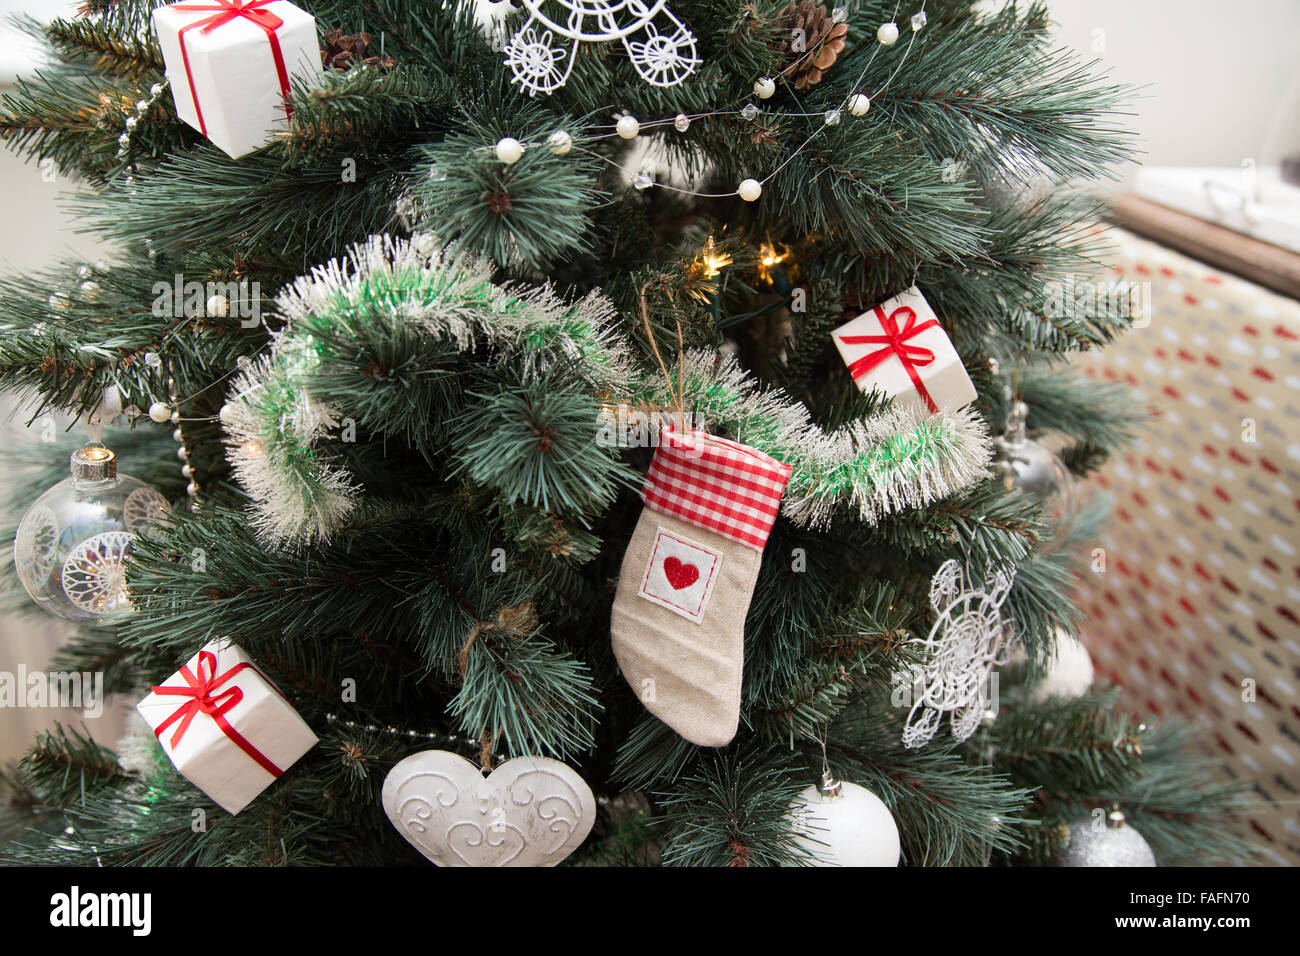 Christmas fir tree with hanging decorations close up with stocking baubles tinsel and presents Stock Photo